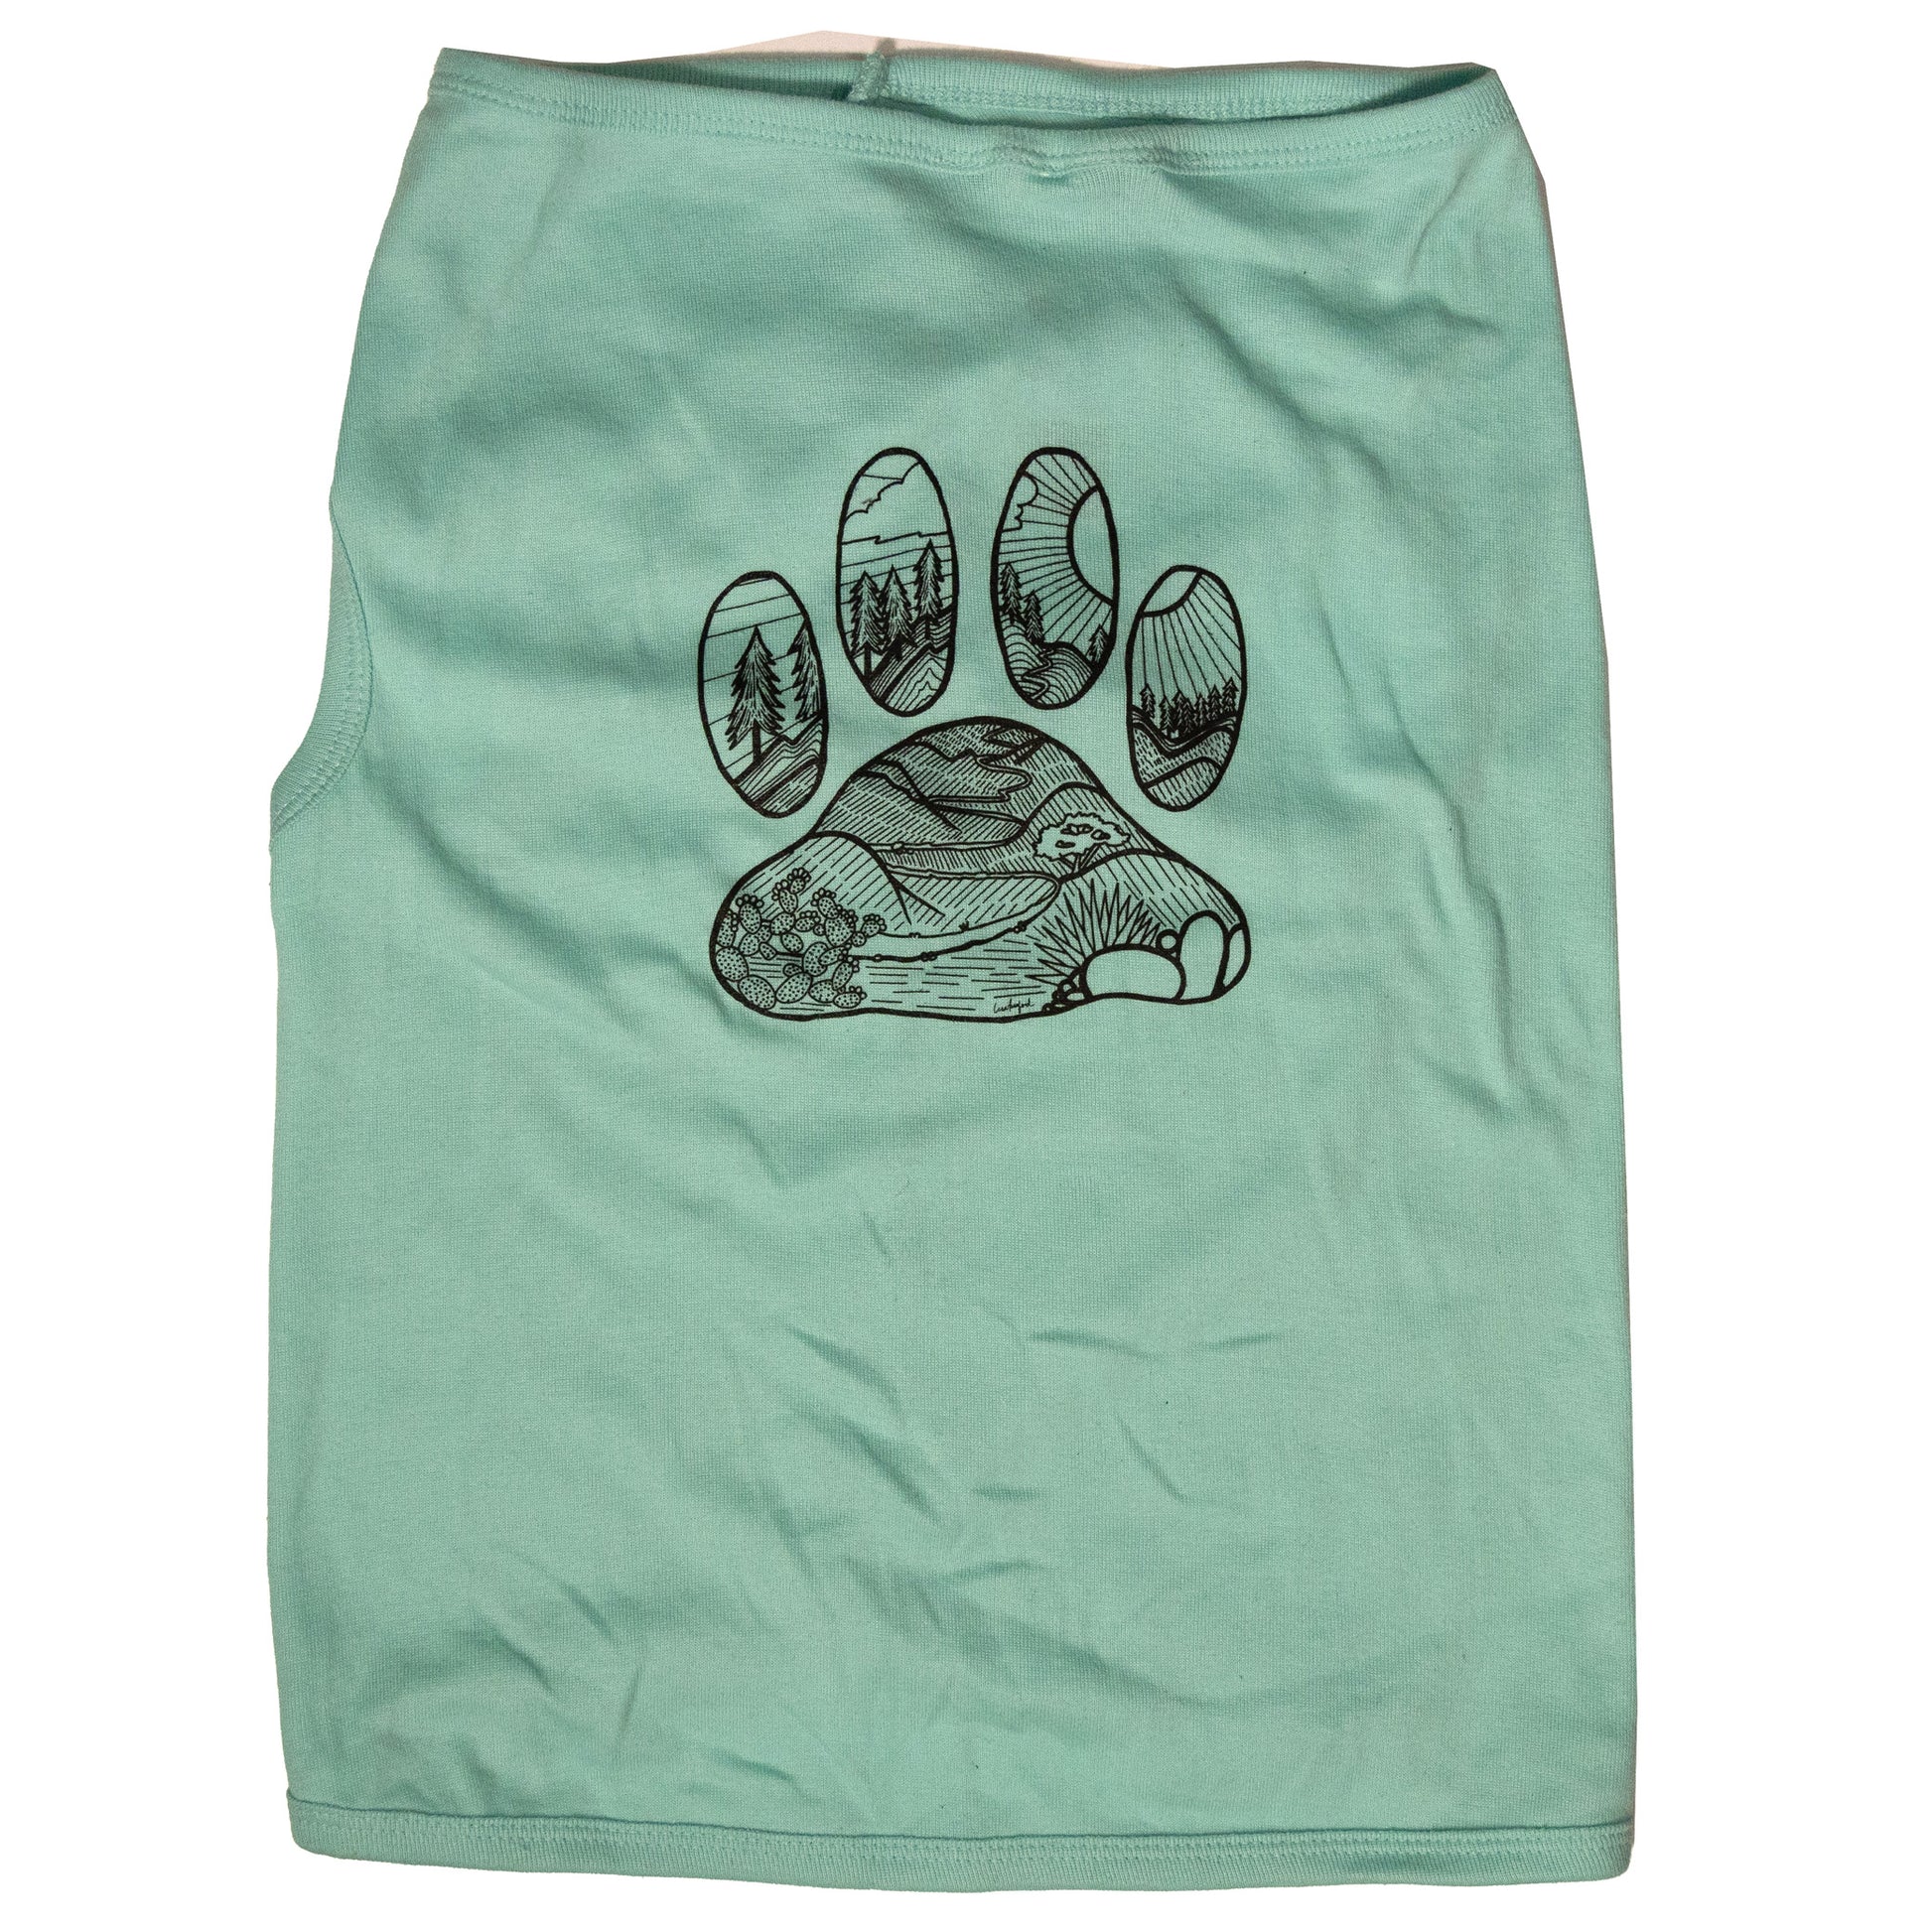 A light blue color dog shirt in a tank top style. The illustrated design on the back features a desert floor leading up to mountains with pine trees. The design is inside the shape of a dog paw print. The illustration is in black and the shirt color is light blue.